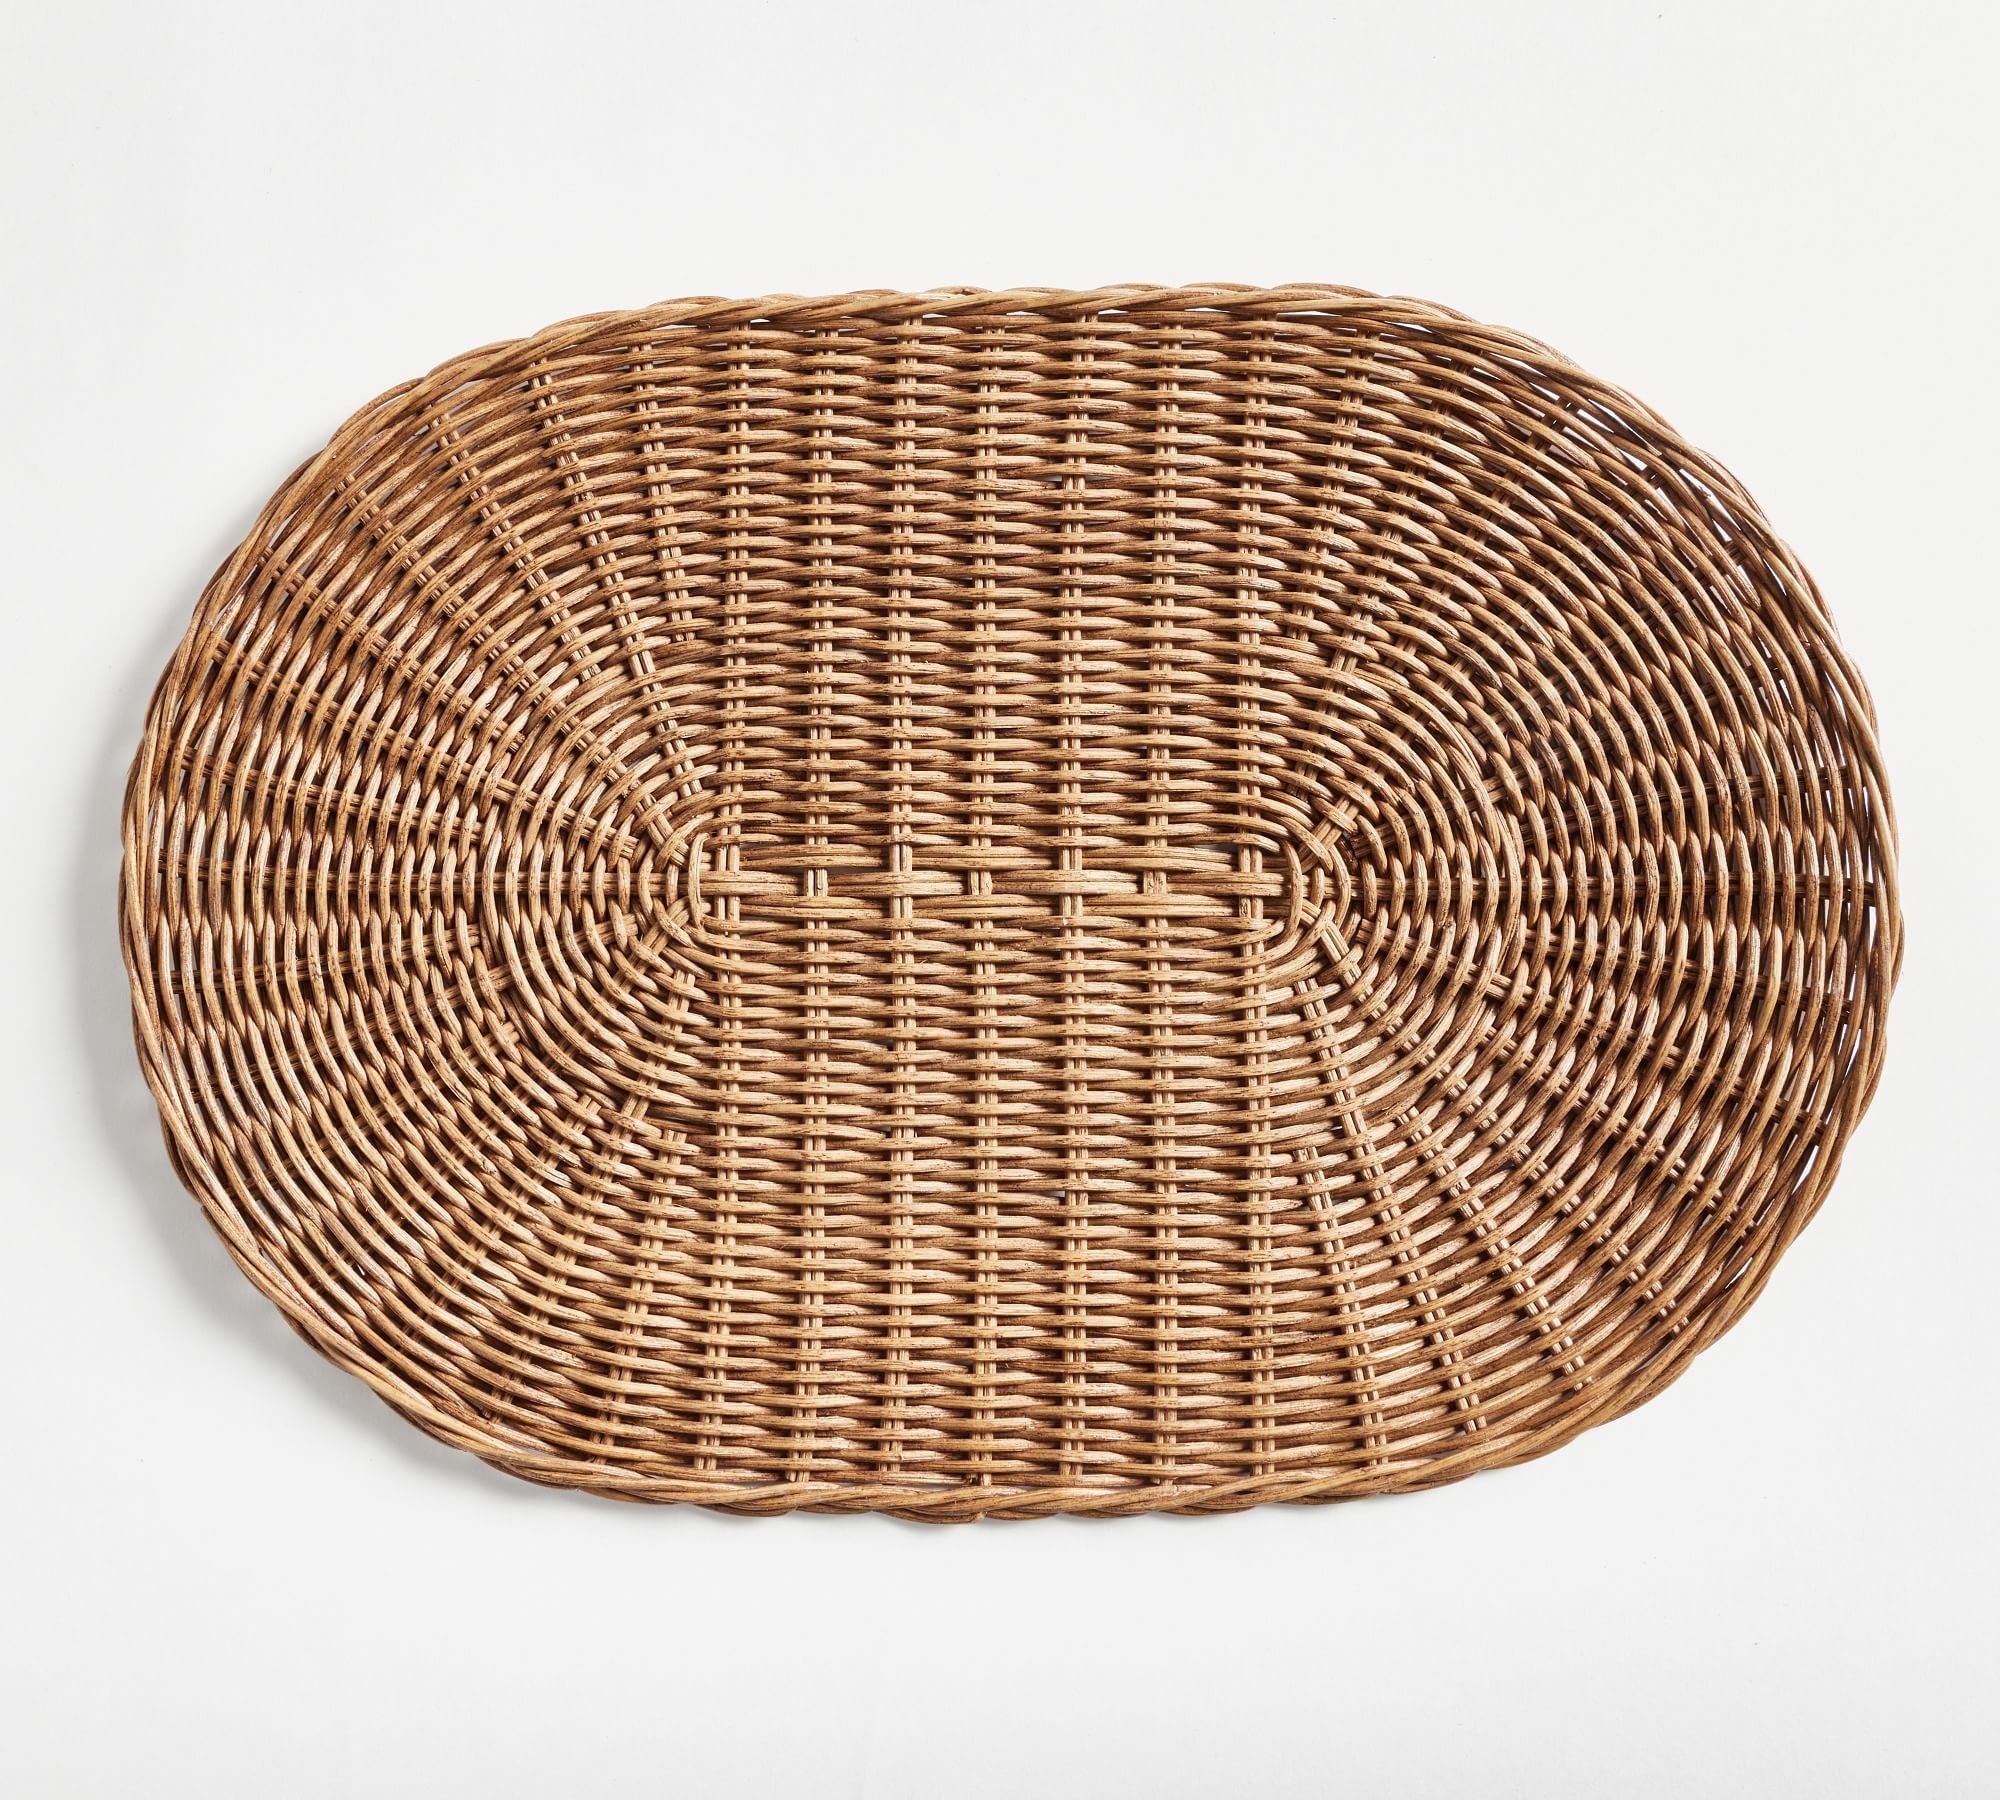 Handwoven Wicker Oval Charger